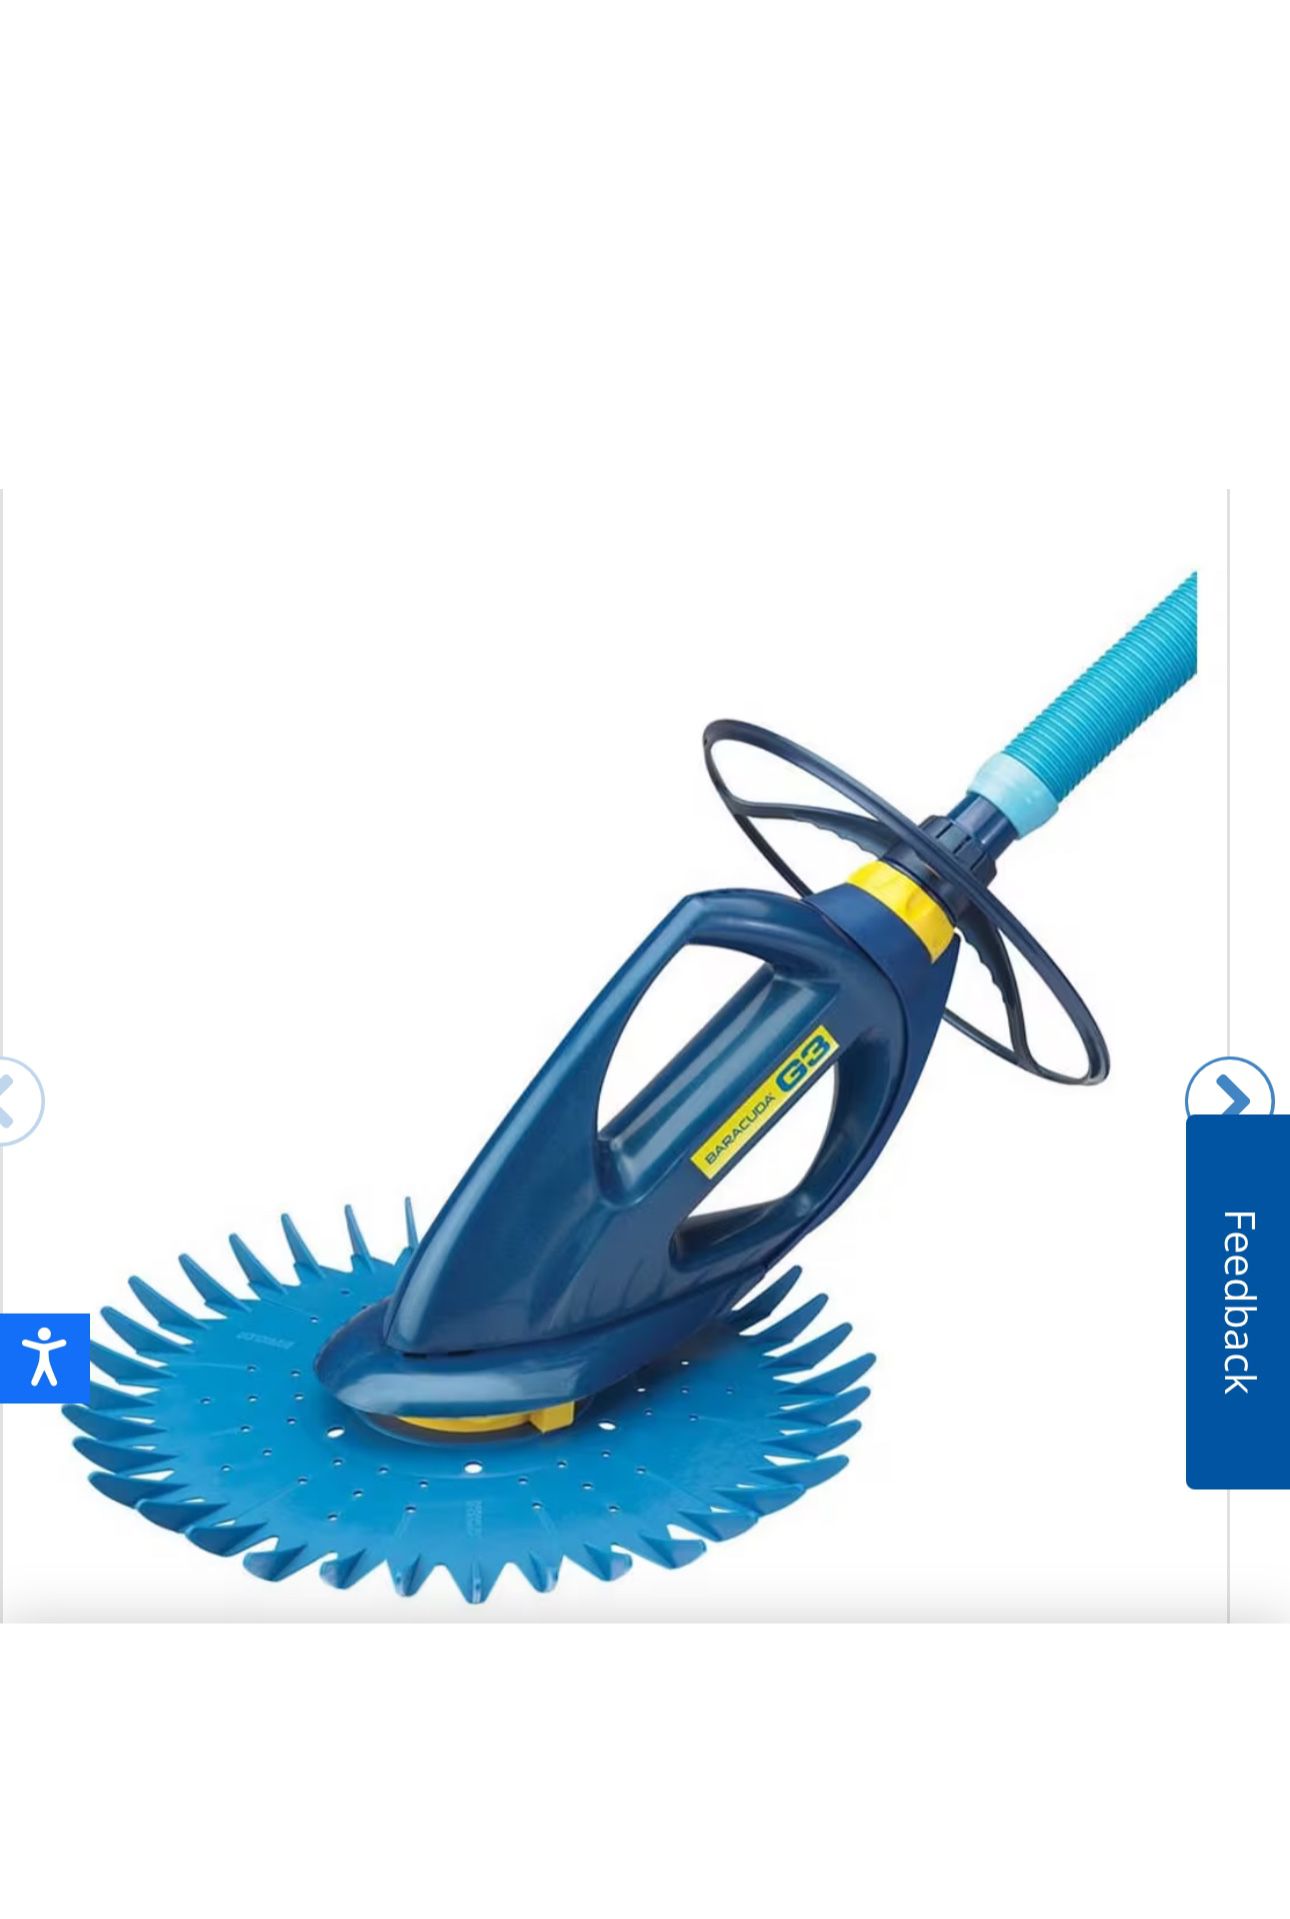 Zodiac - G3 Advanced Suction Side Automatic Pool Cleaner